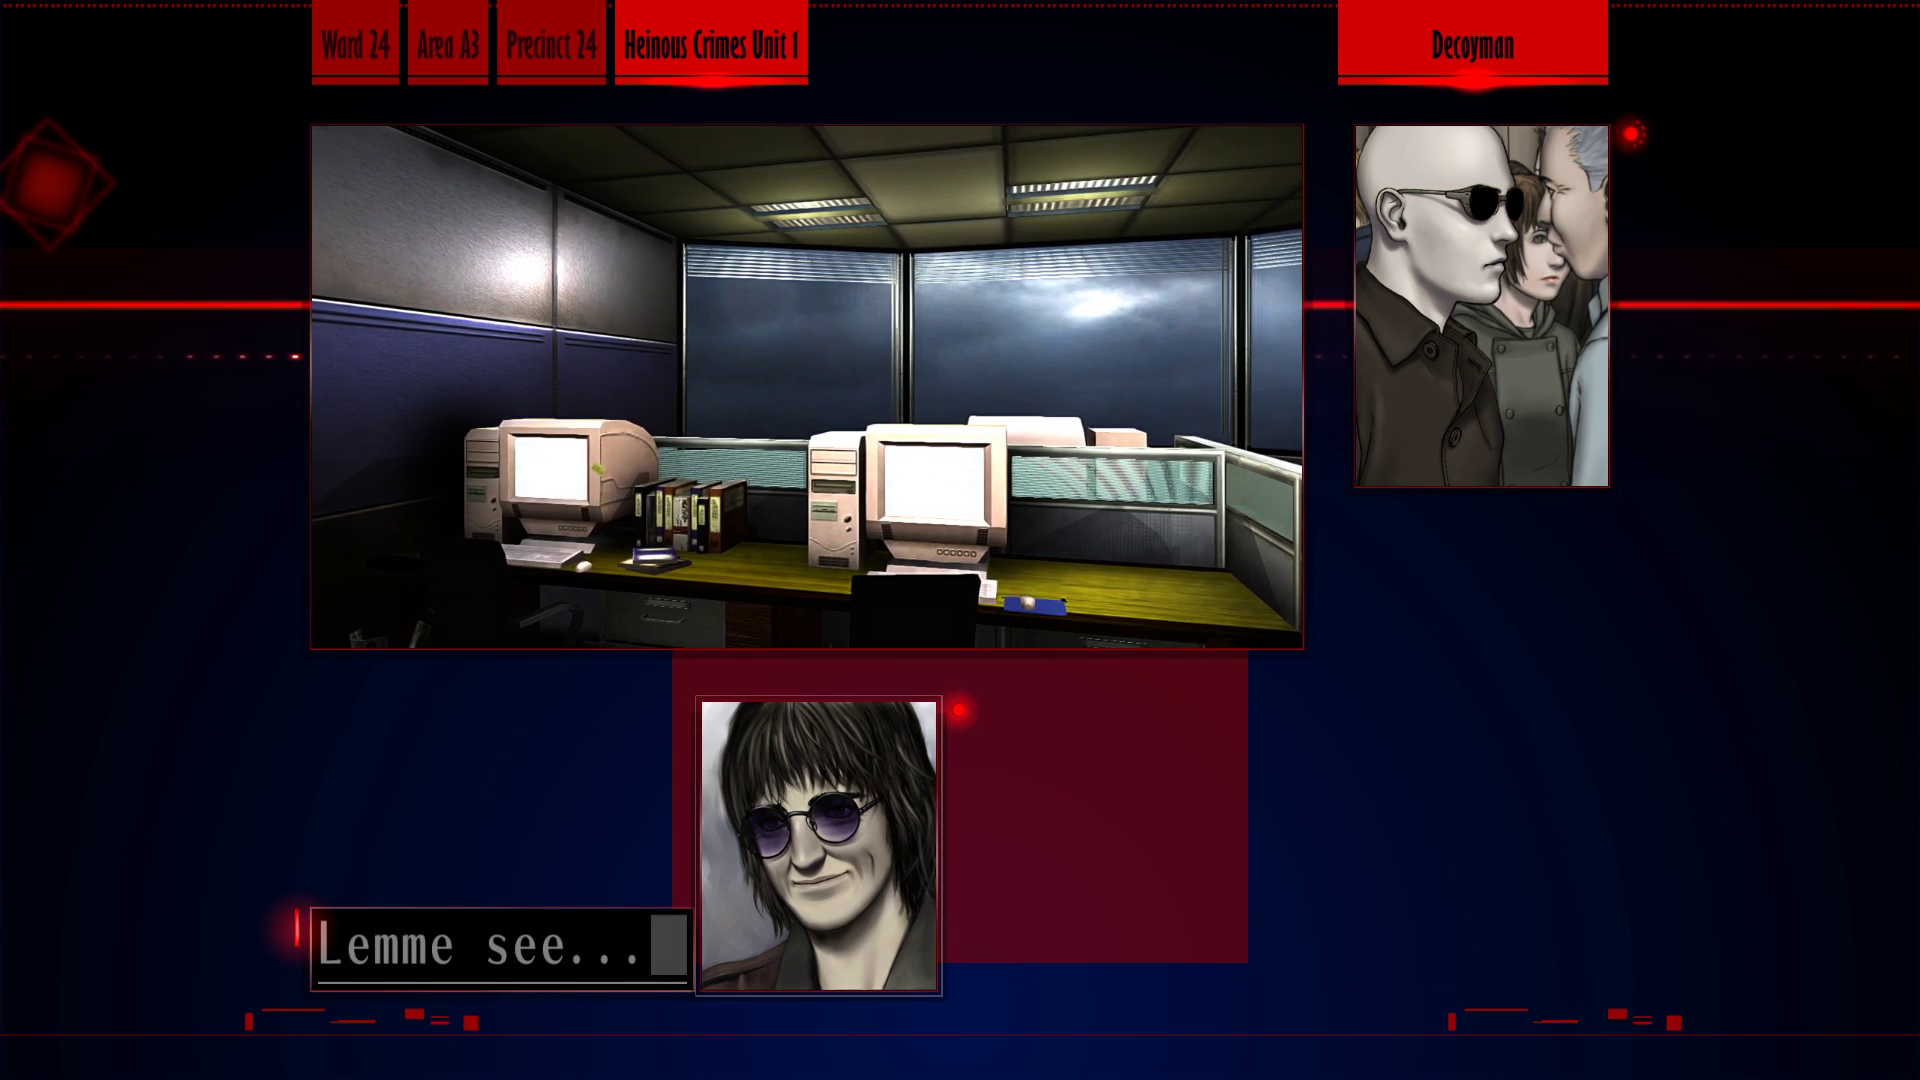 Screenshot from "Decoyman." One window shows the Precinct 24 Heinous Crimes Unit 1 office. To the right is a window showing the photograph of Kamui, a bald man wearing sunglasses in a crowd. Morikawa says, "Lemme see..."